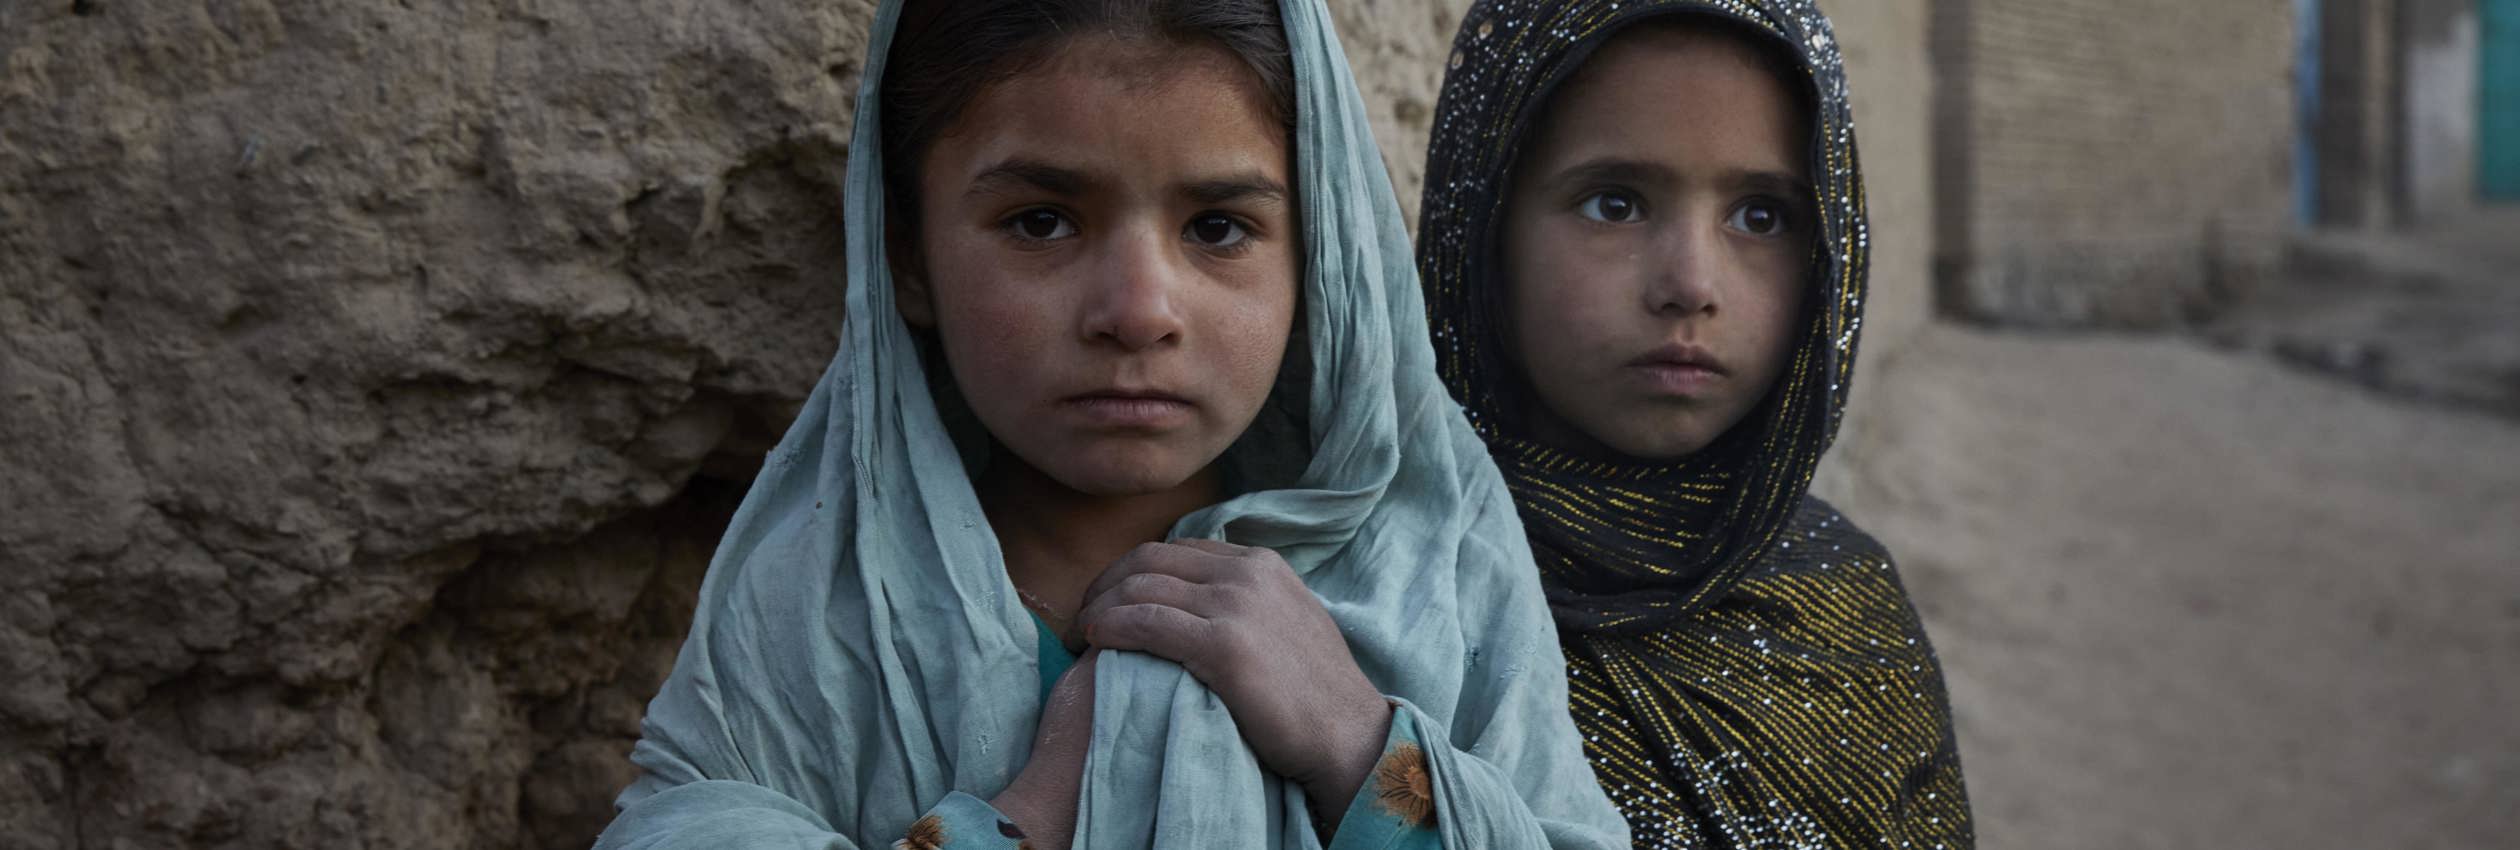 Seven-year-old Runa* from Jalalabad (left) and her friend Gul Bibi*, 7, from Kunduz, in their new neighbourhood on the edge of Kabul.